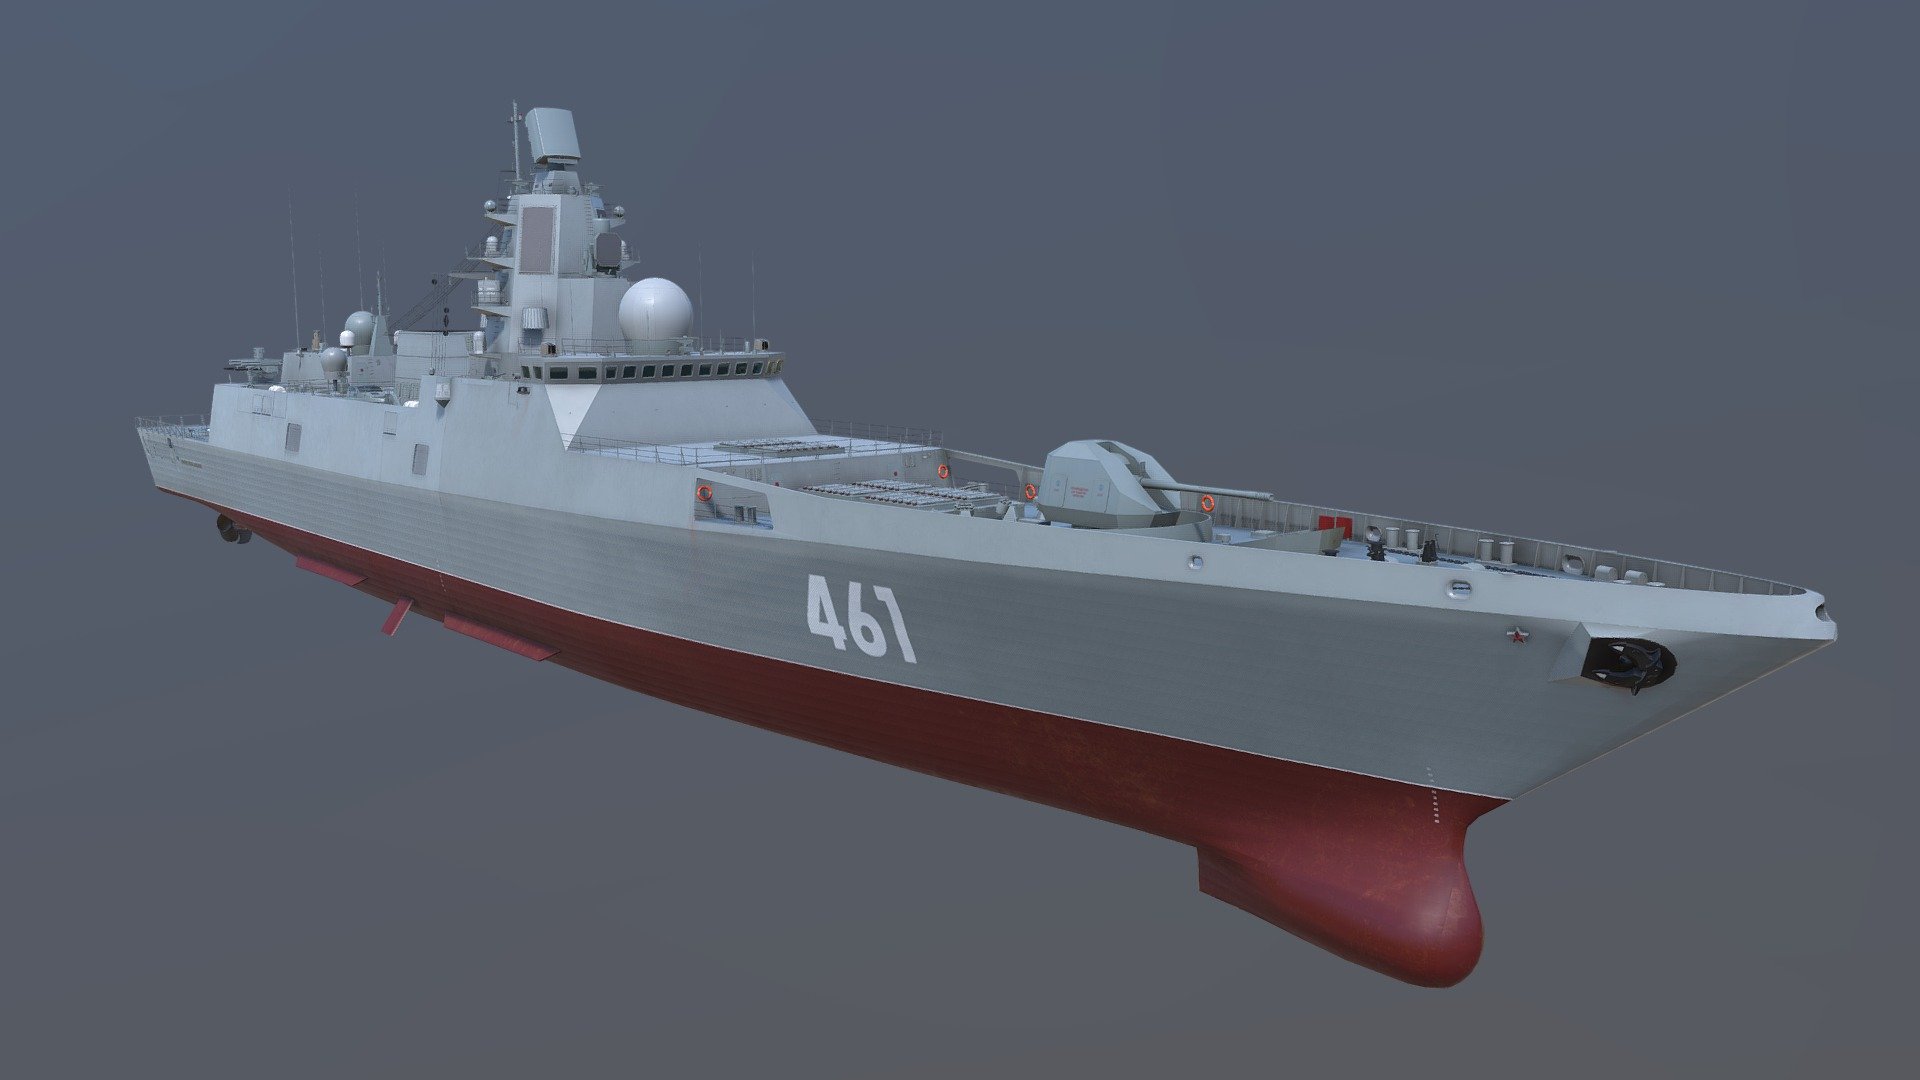 The Admiral Gorshkov class, Russian designation Project 22350 for the original and upgraded version armed with 16 and 24 VLS cells respectively, is the newest class of frigates being built by the Severnaya Verf in Saint Petersburg for the Russian Navy. The Project 22350 was designed by the Severnoye Design Bureau and incorporates use of stealth technology. As of August 2020, ten vessels have been contracted for delivery by 2027. The lead ship of the class, Admiral Gorshkov, was commissioned on 28 July 2018 3d model